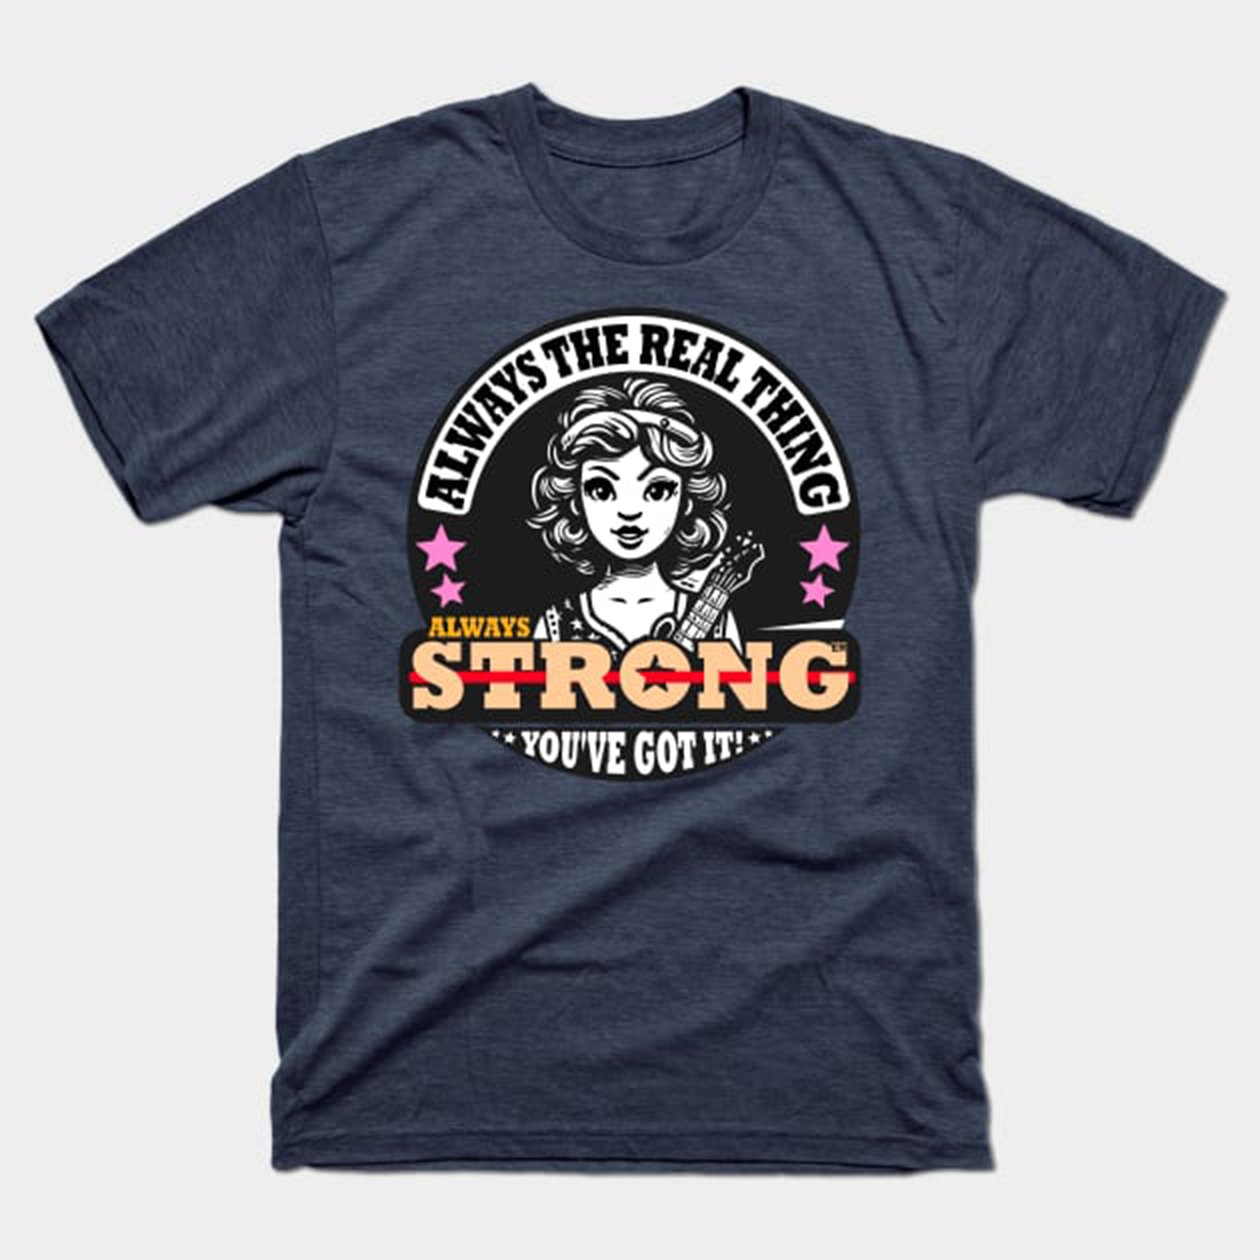 Always Real, Always Strong T-Shirt